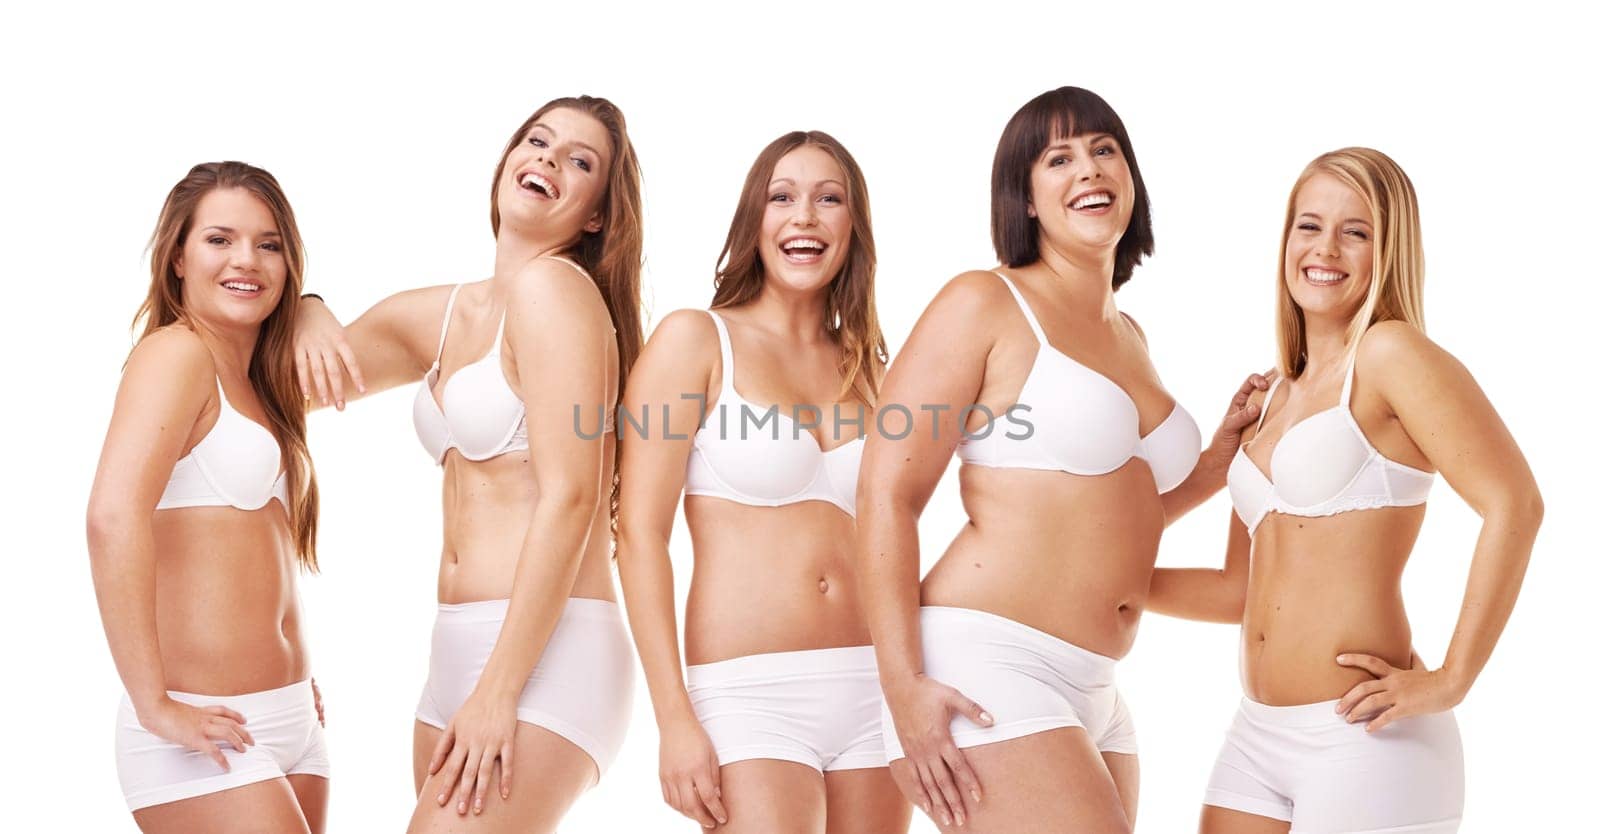 Portrait, smile and underwear with natural women in studio isolated on white background for wellness. Skincare, beauty and plus size with model group together for body positive support or empowerment.